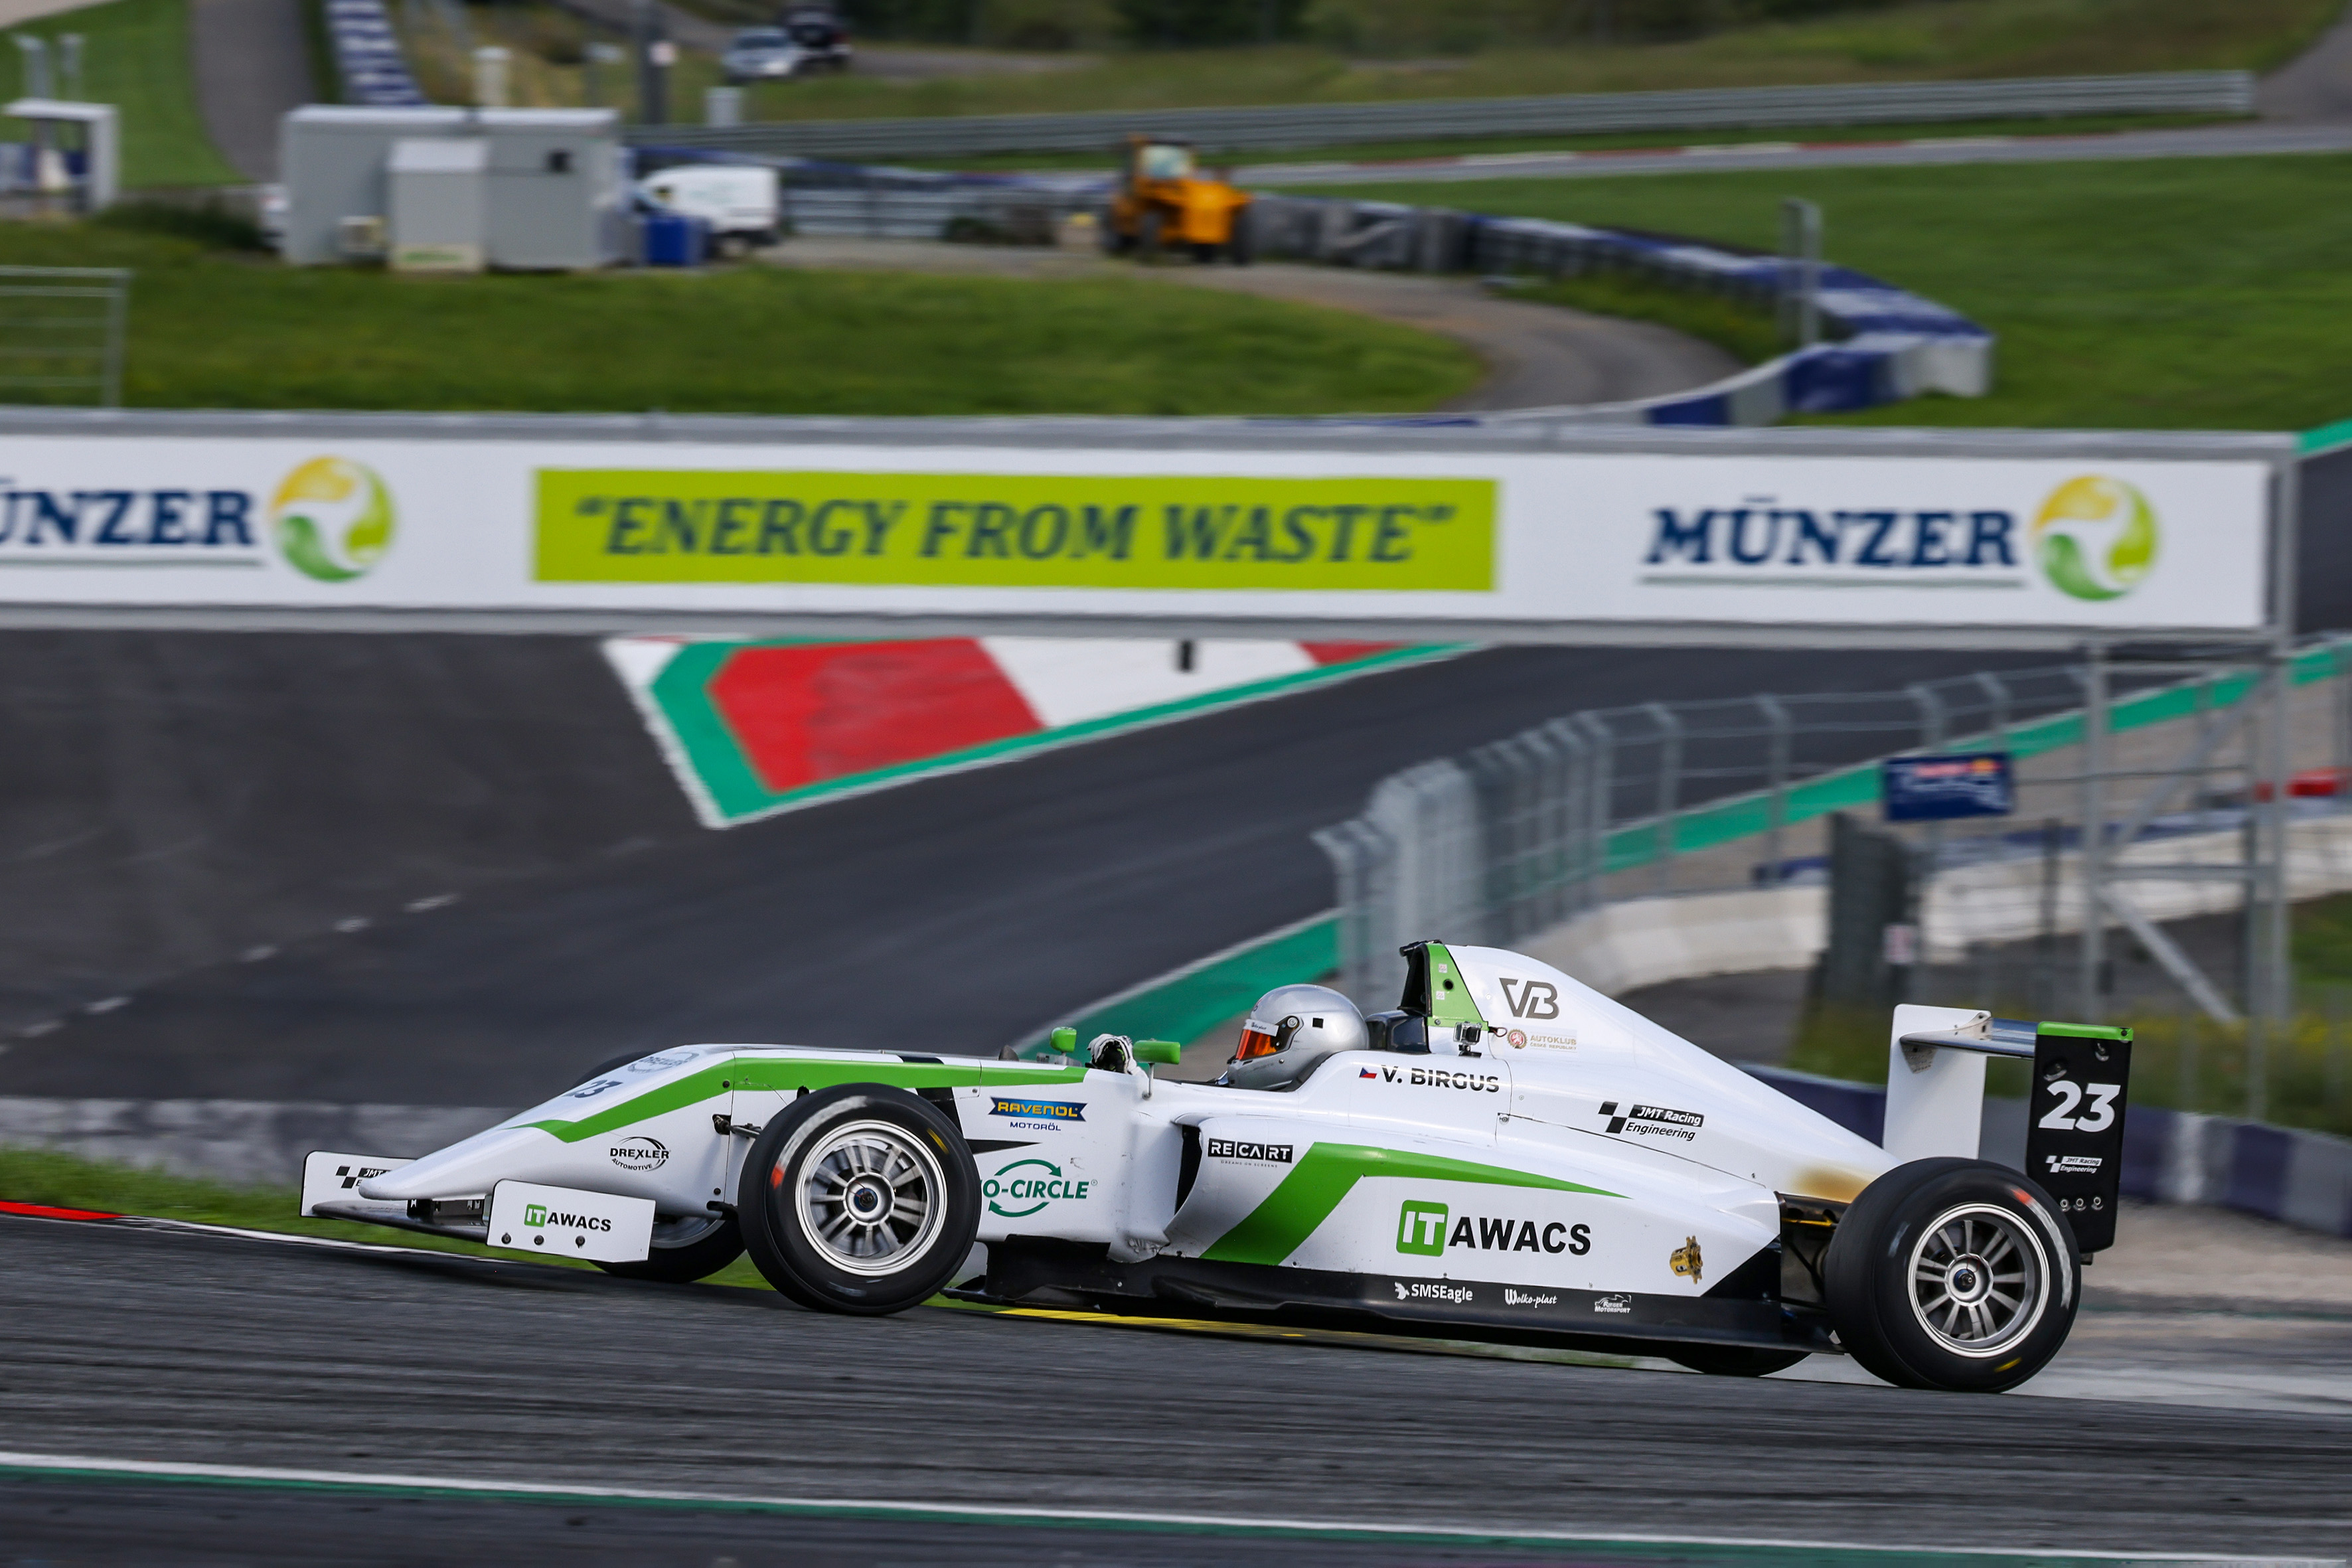 The four drivers with the support of the Czech Autoclub did well at the Red Bull Ring